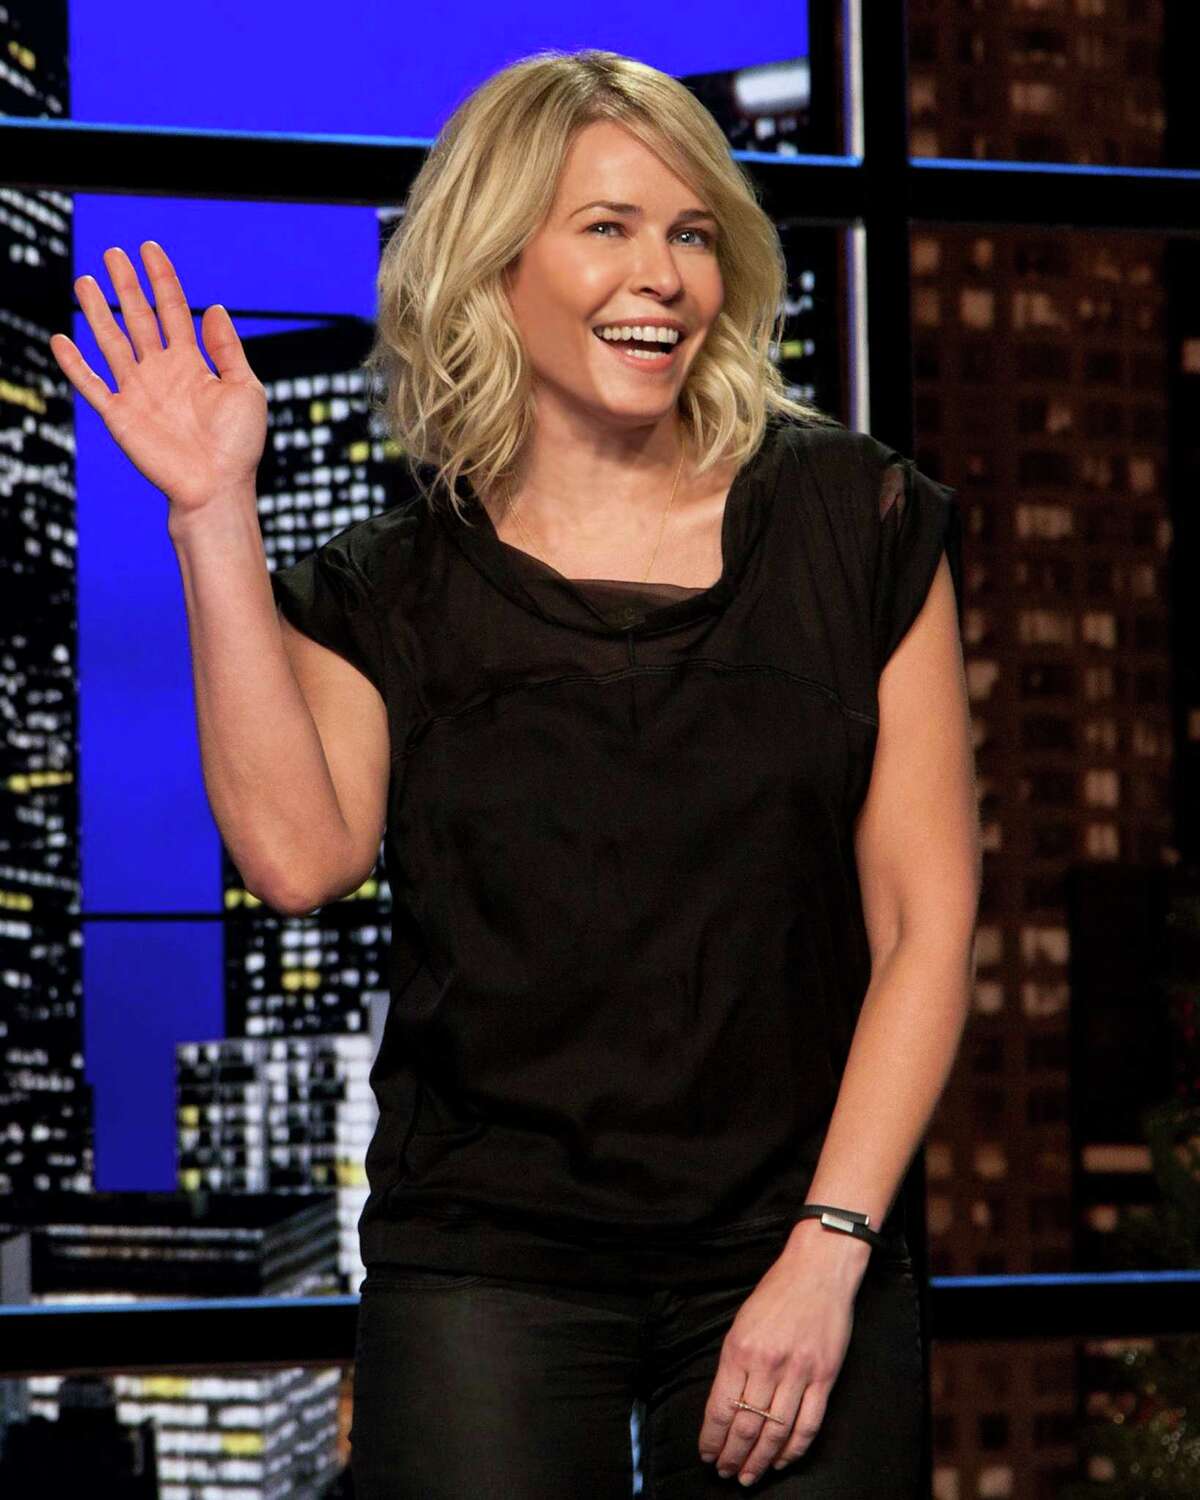 Chelsea Handler,best-selling author and host of "Chelsea Lately," a late-night talk show on E!